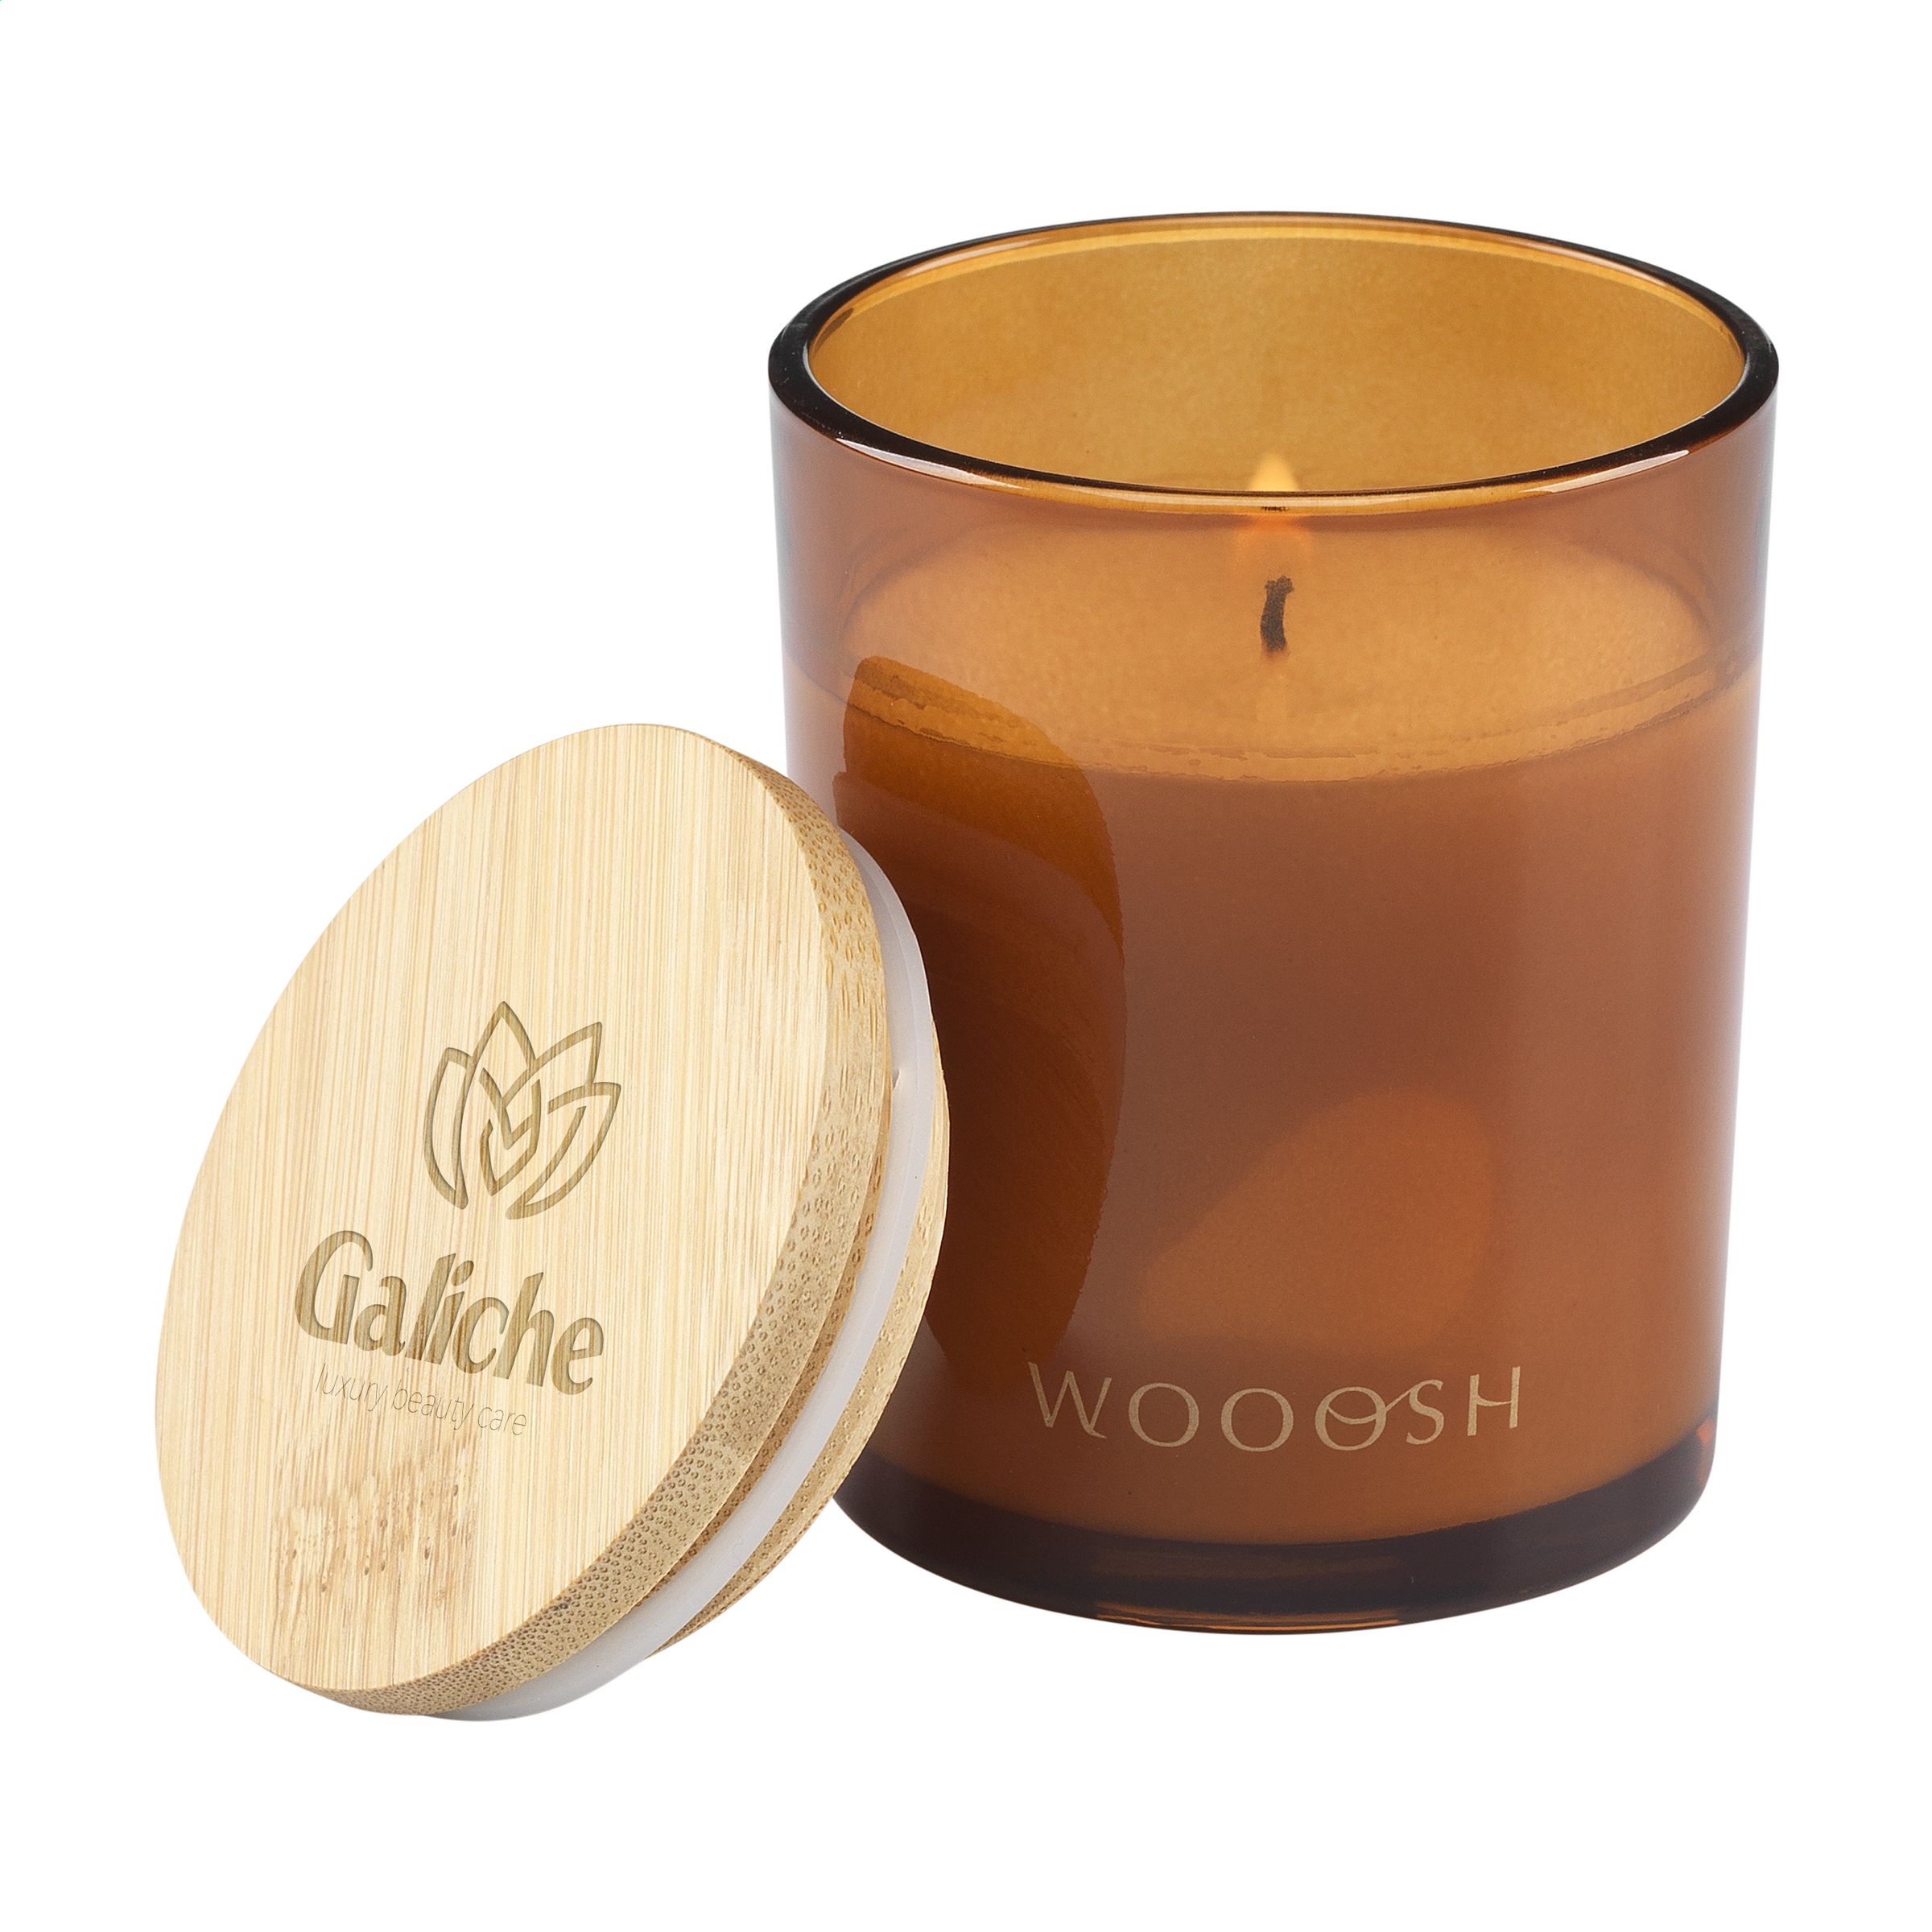 Wooosh Musk Peach Scented Candle - Ballater